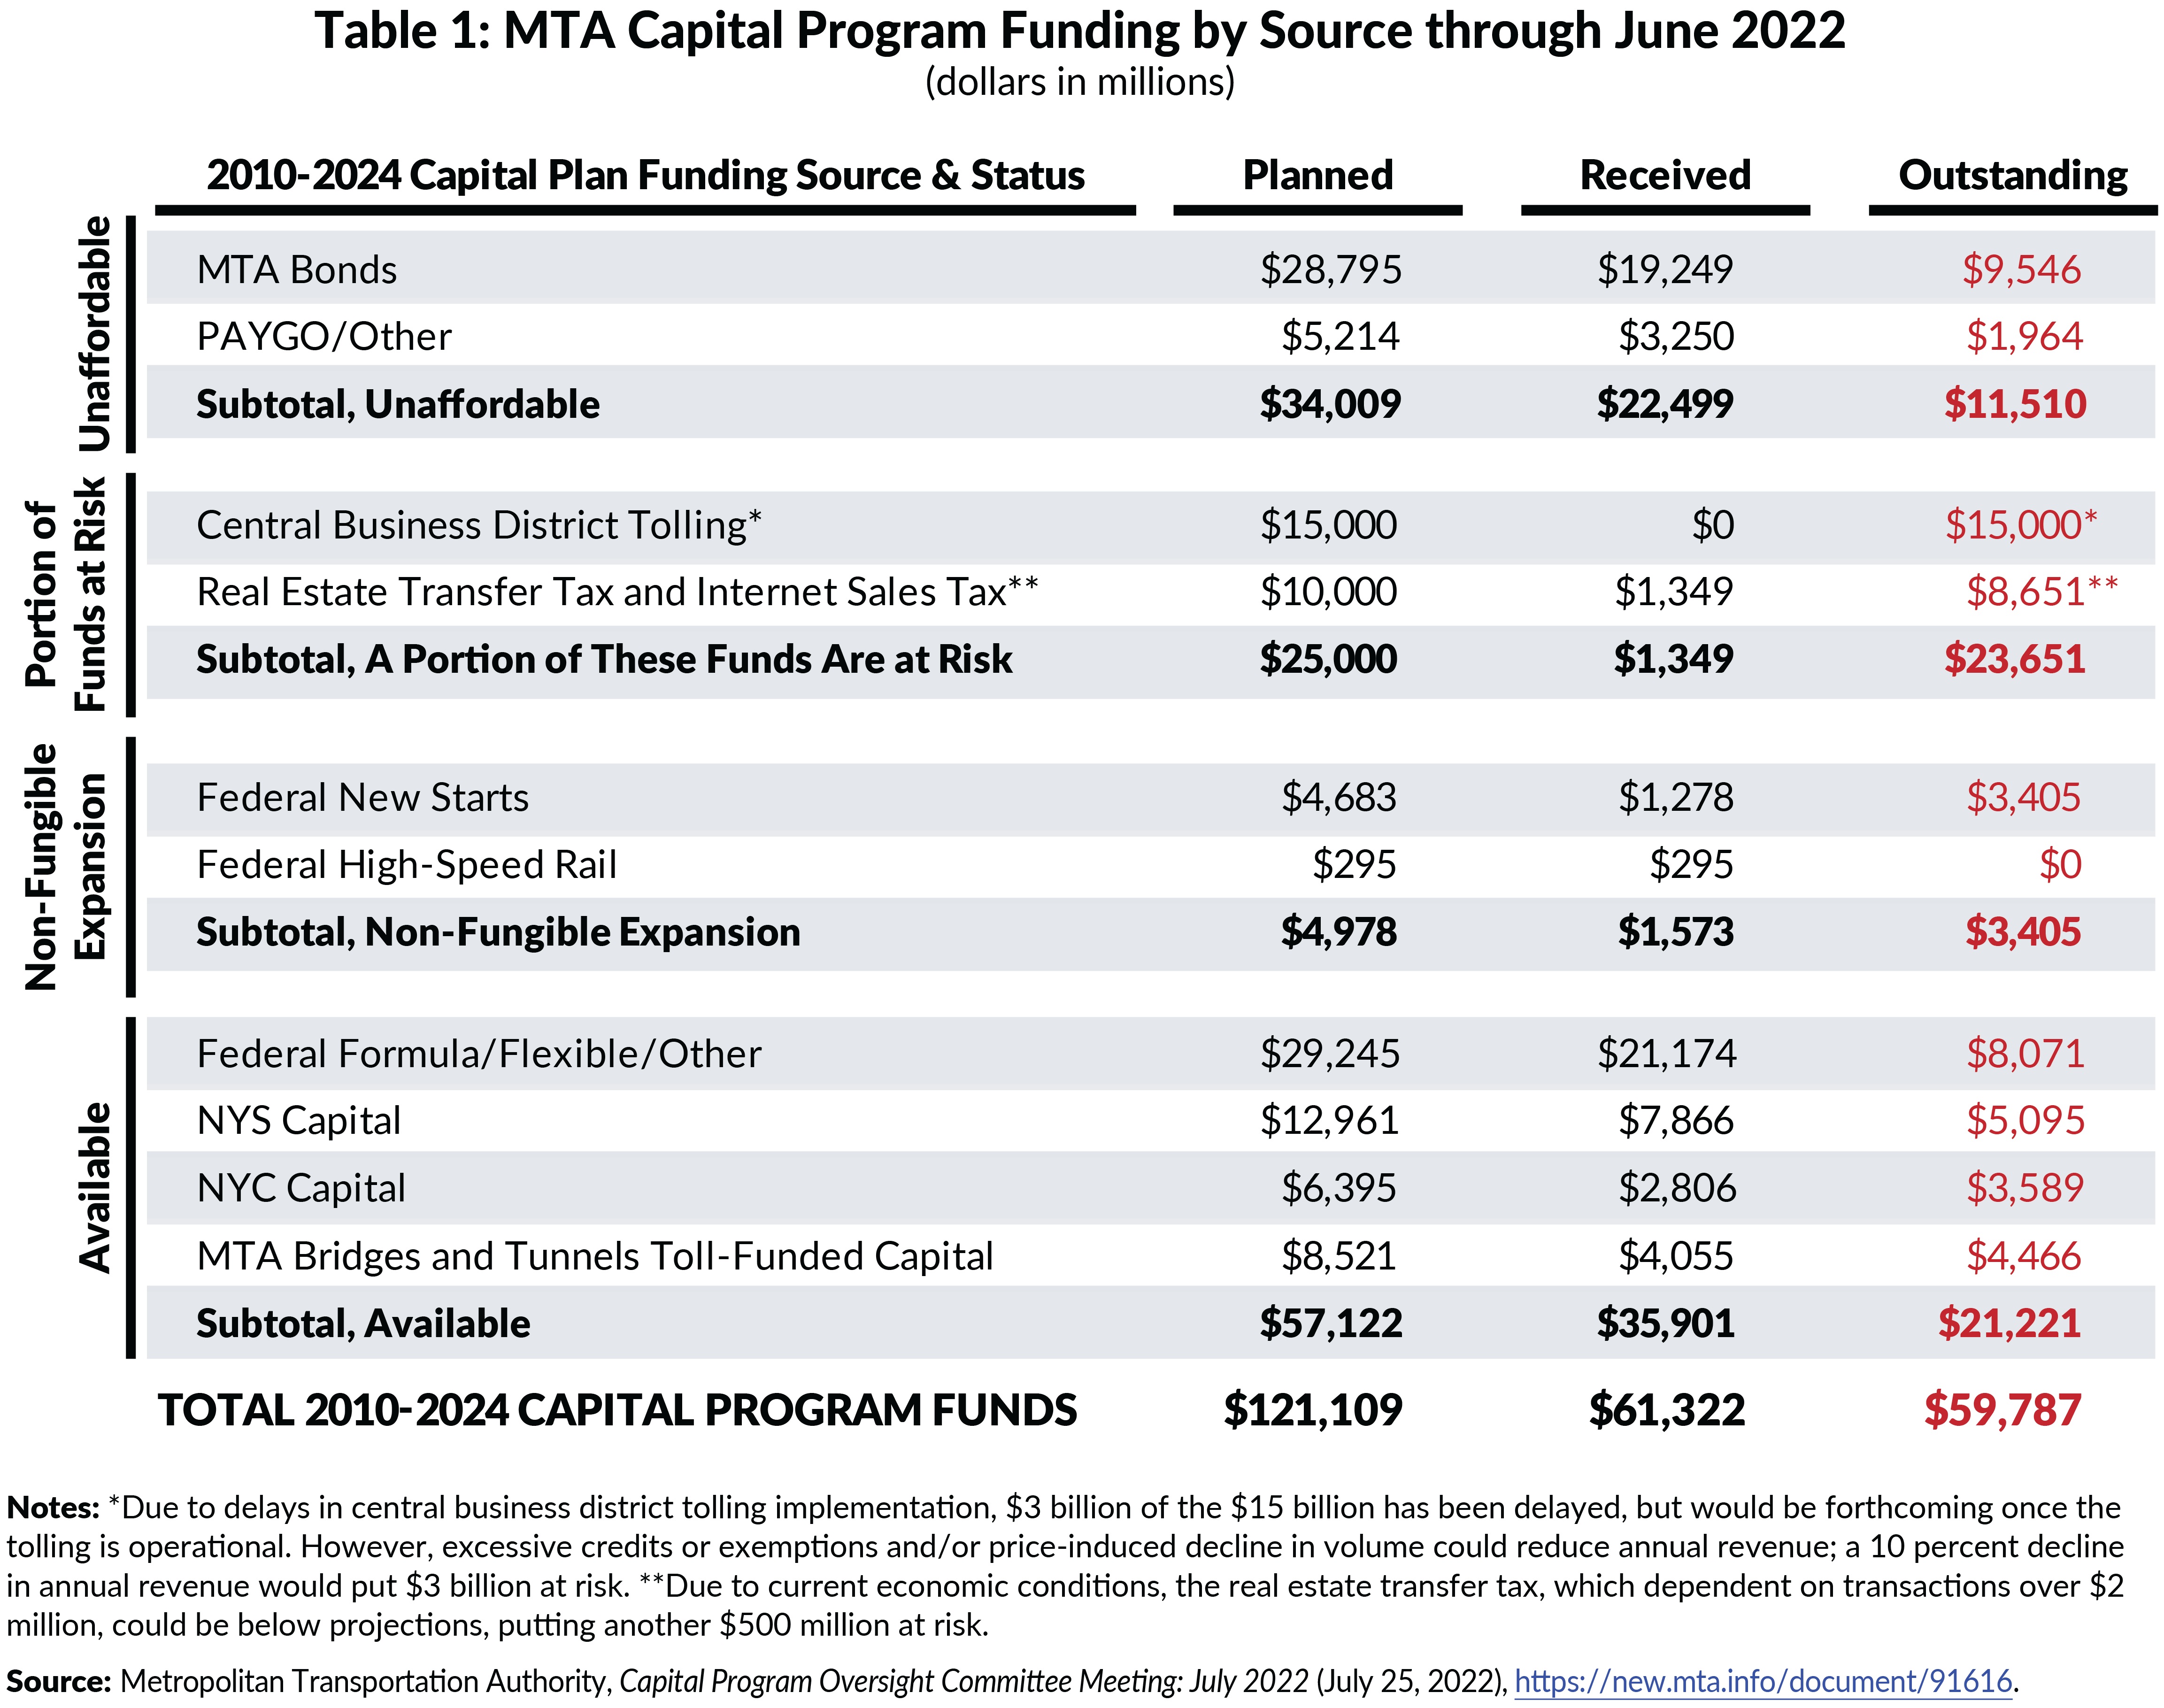 Table 1: MTA Capital Program Funding by Source through June 2022